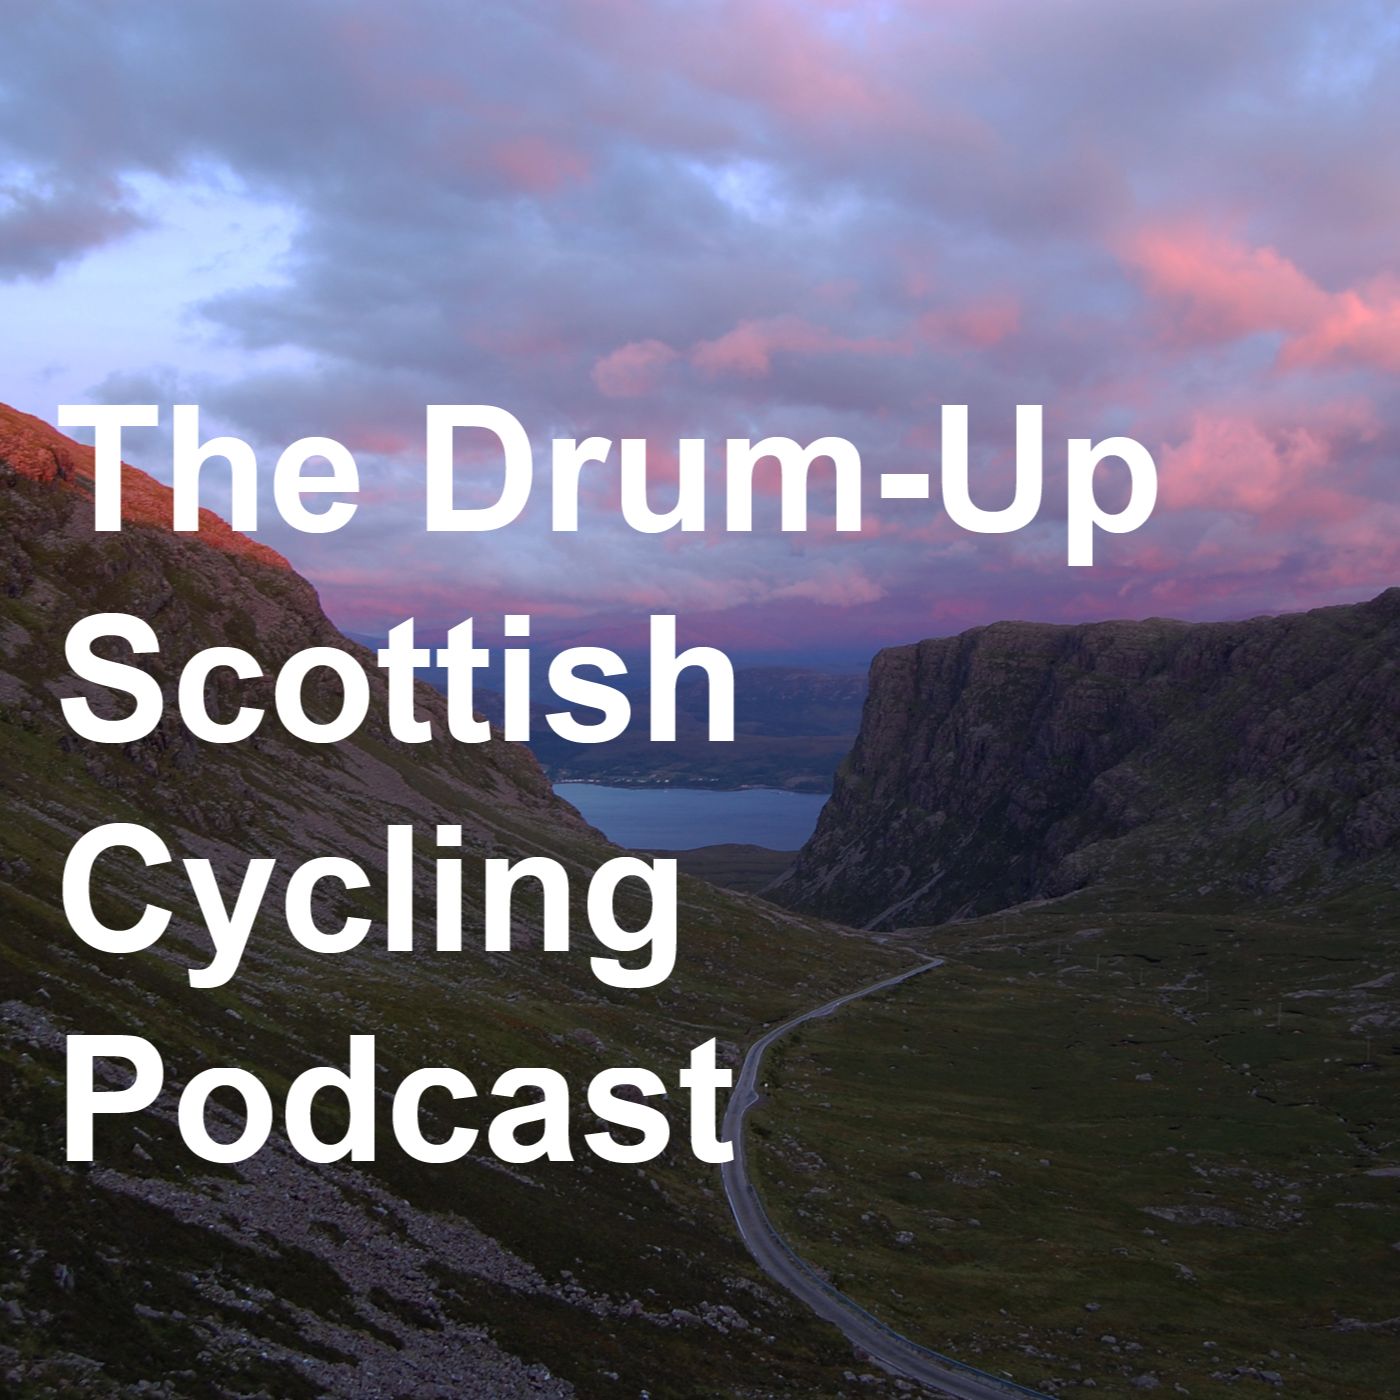 The Drum Up Scottish cycling podcast